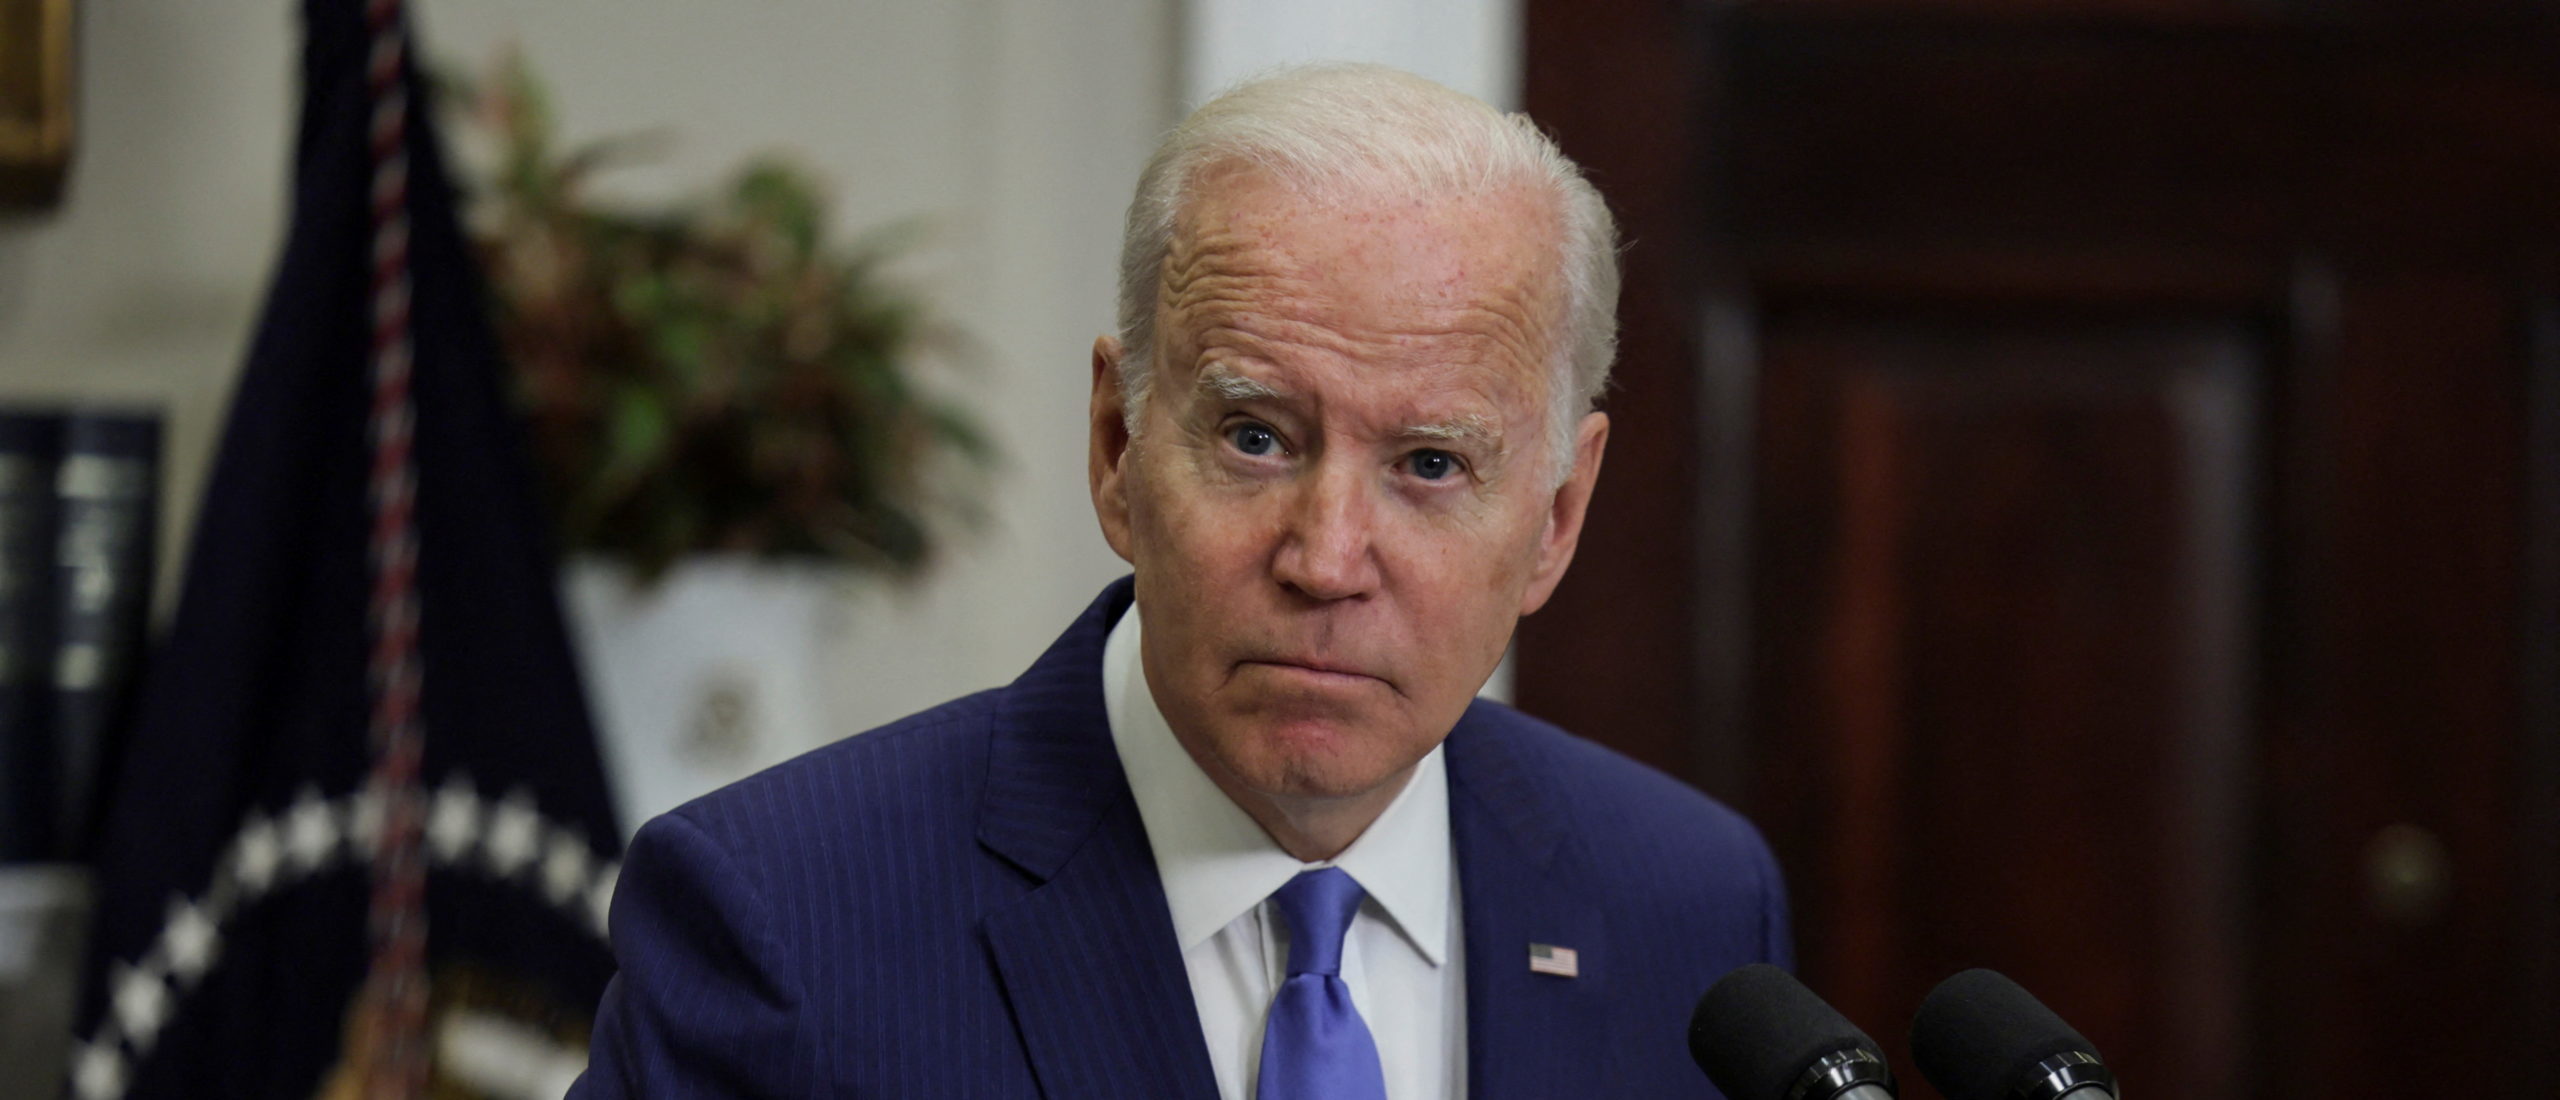 Americans Aren’t Buying Biden’s Tale Of Economic Recovery